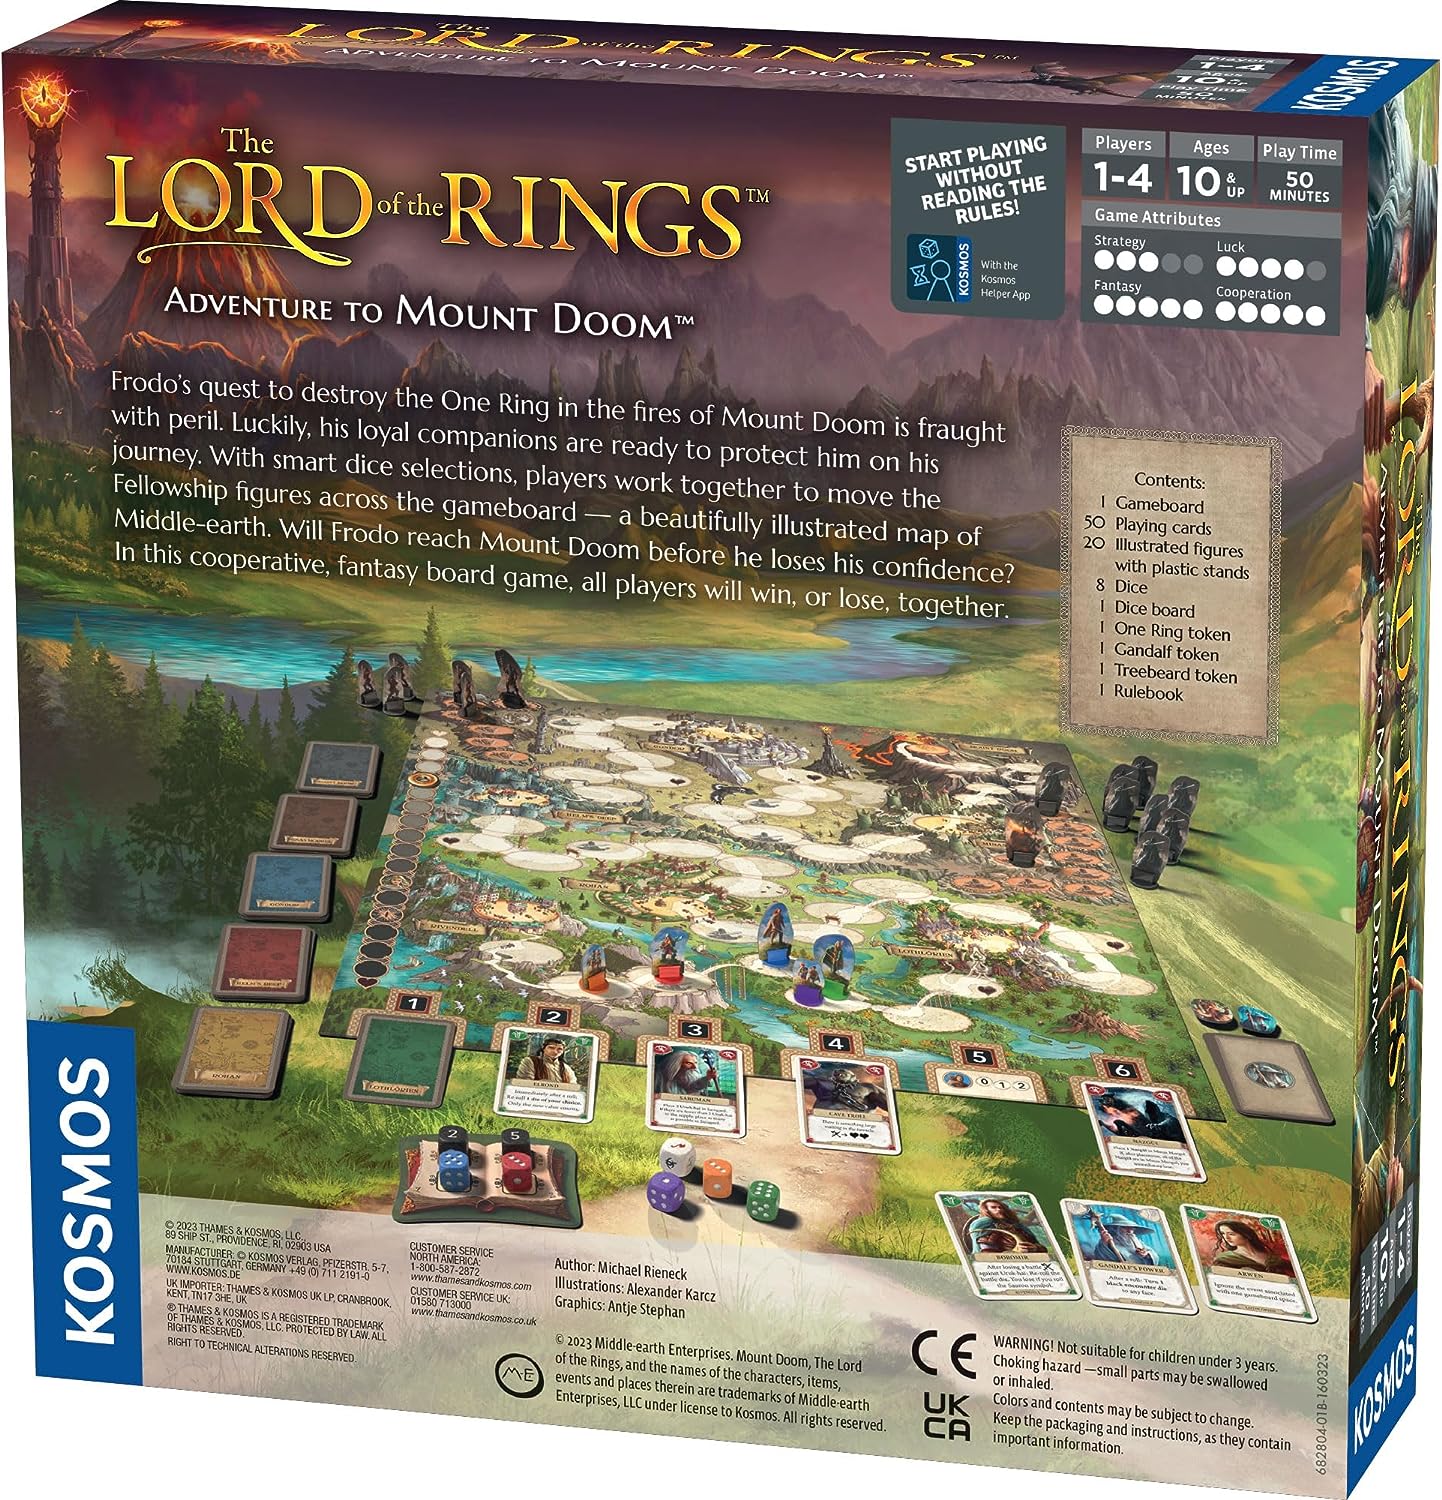 The Lord of The Rings: Adventure to Mount Doom